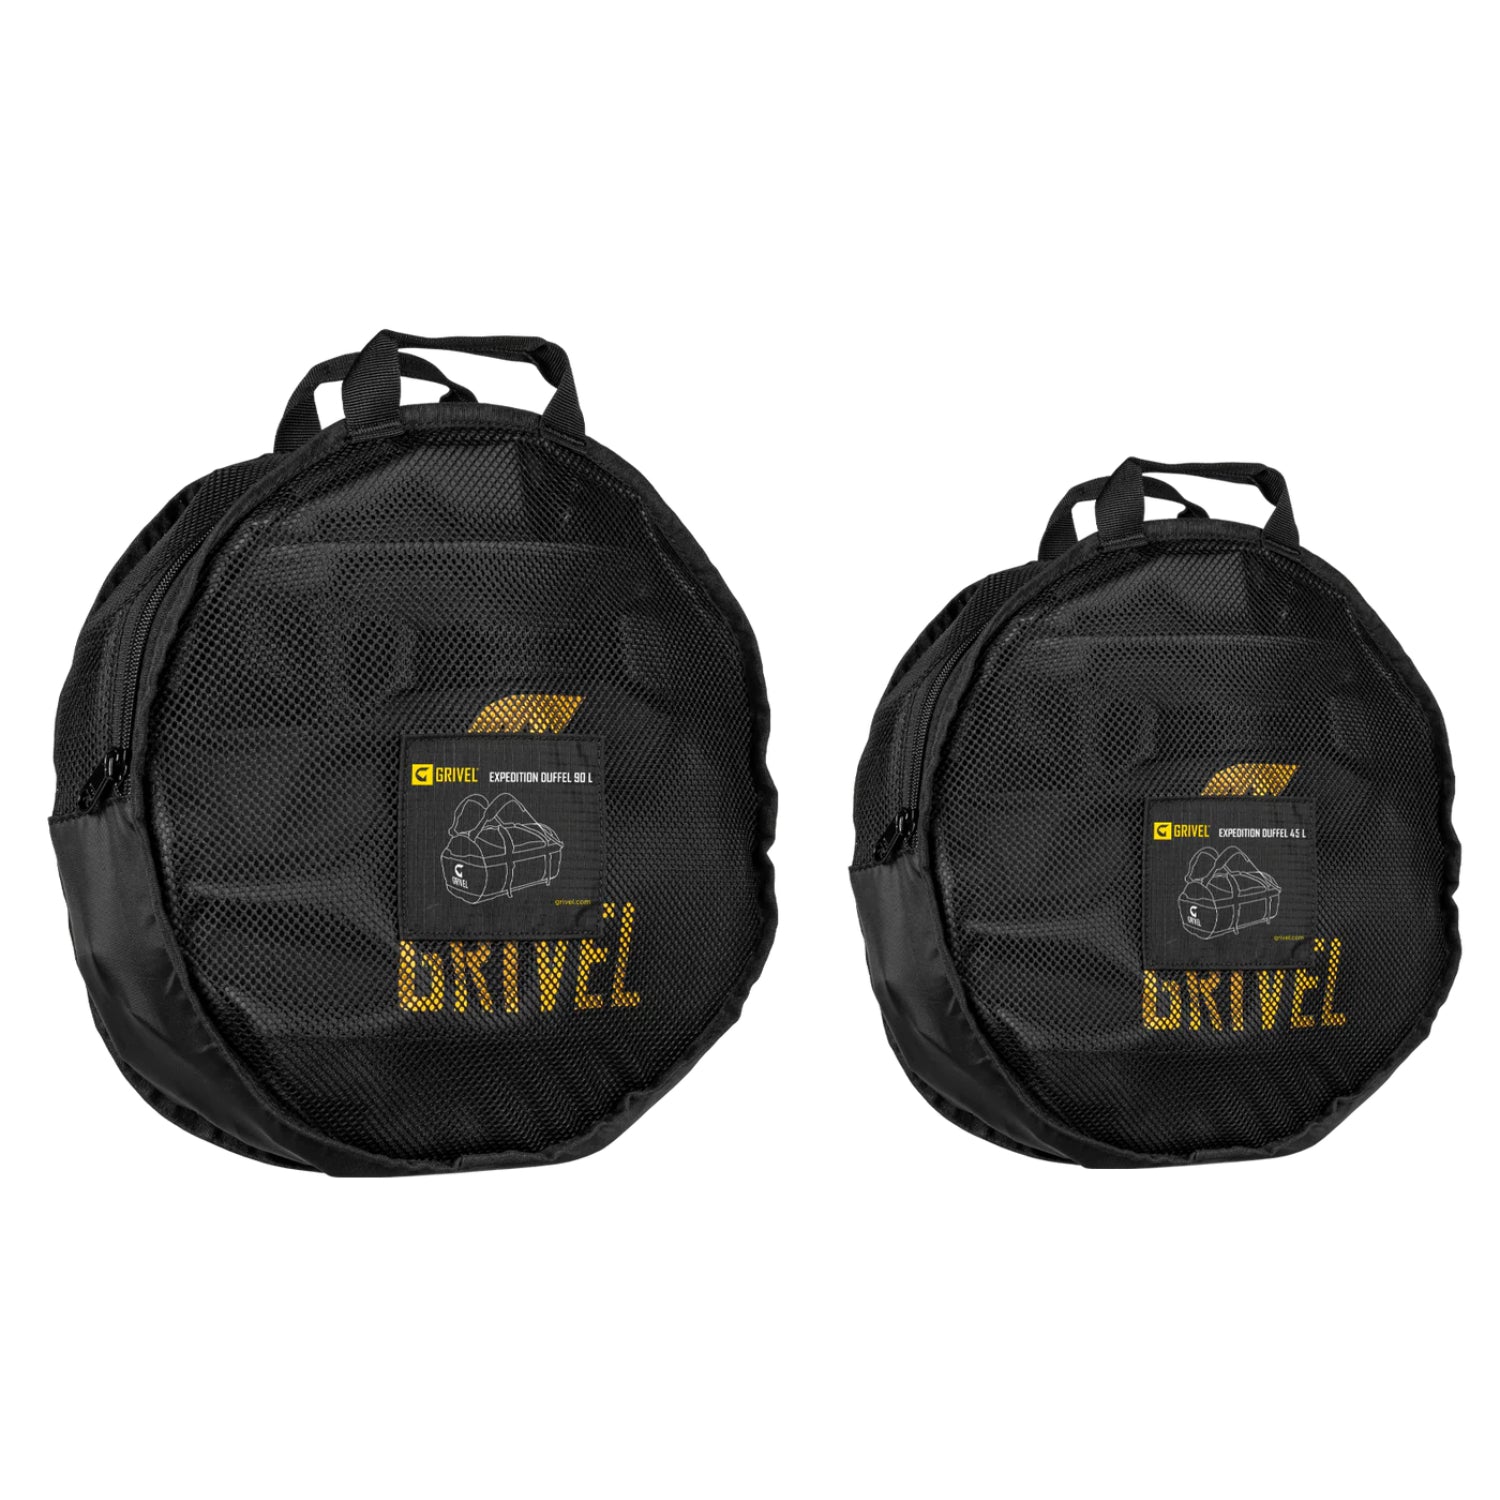 Grivel Expedition Duffel 45L